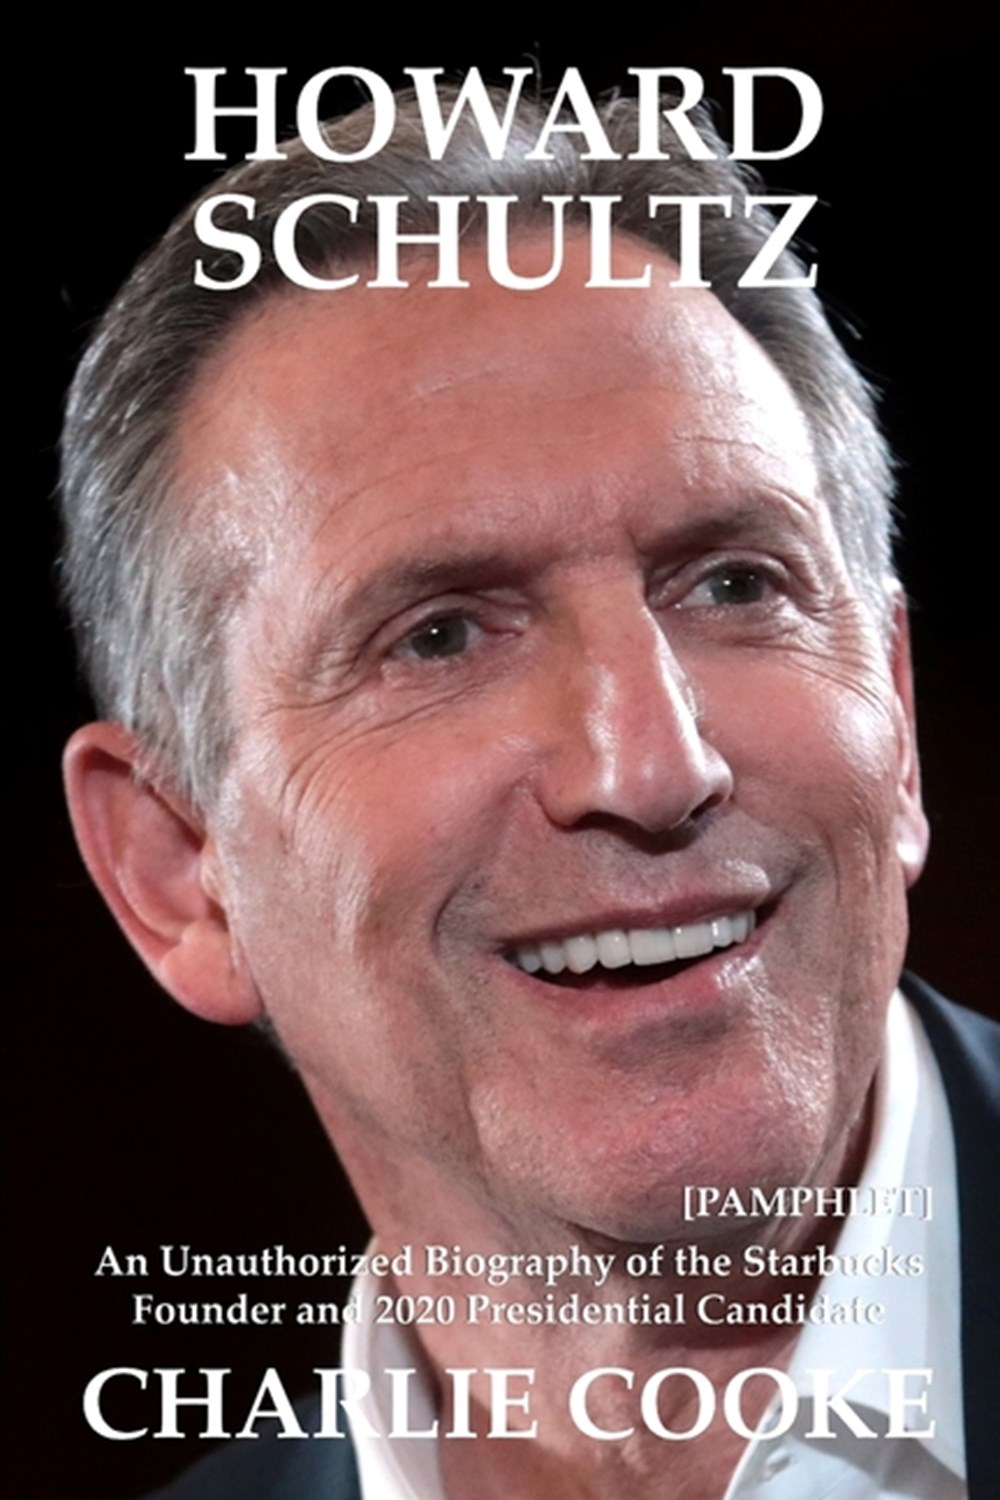 Howard Schultz An Unauthorized Biography of the Starbucks Founder and 2020 Presidential Candidate [P